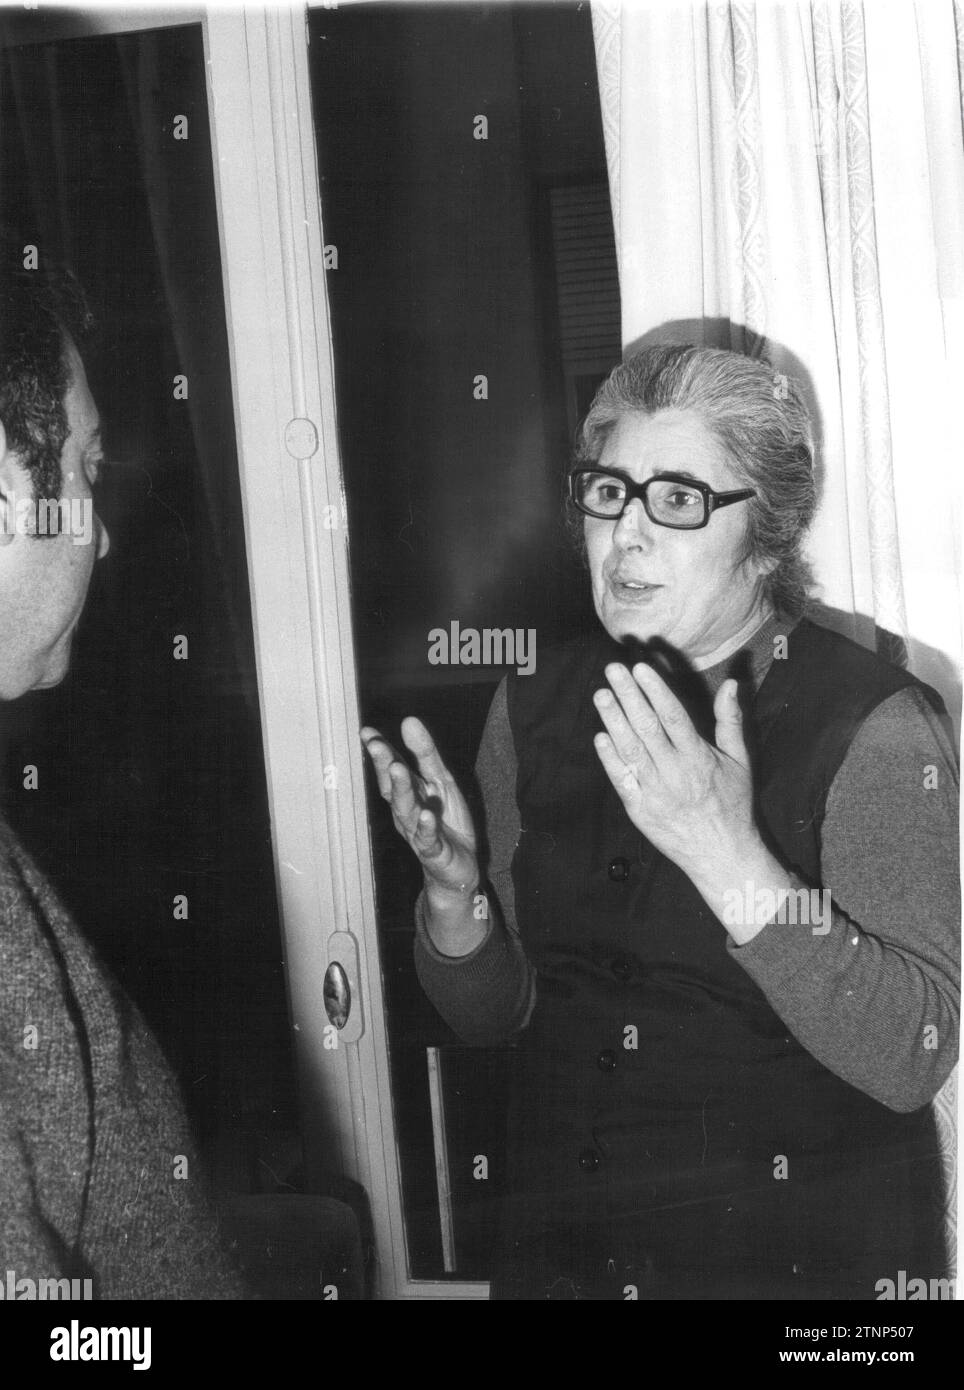 03/17/1972. Josefina Manresa, widow of Miguel Hernández, Interviewed by Tico Medina for Abc on the occasion of the 30th anniversary of the Poet's death. Credit: Album / Archivo ABC / Luis Alonso Stock Photo